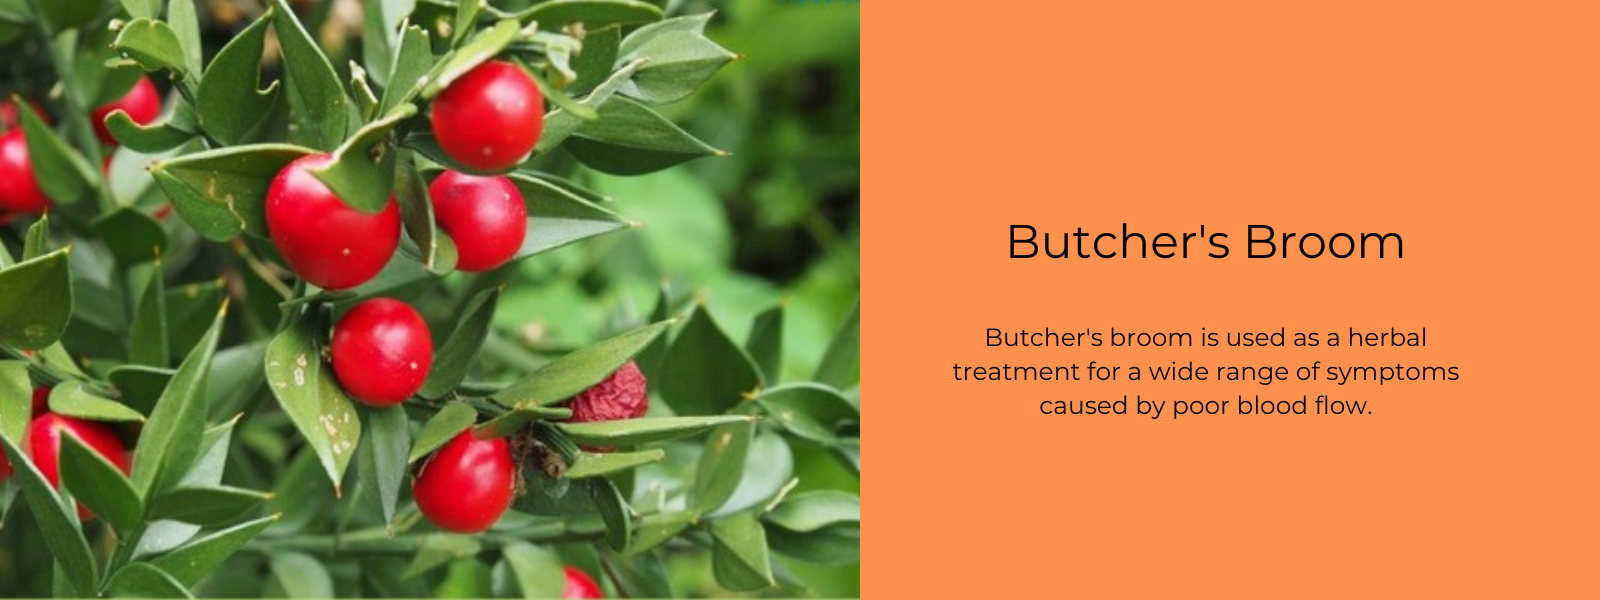 Butcher's Broom - Health Benefits, Uses and Important Facts